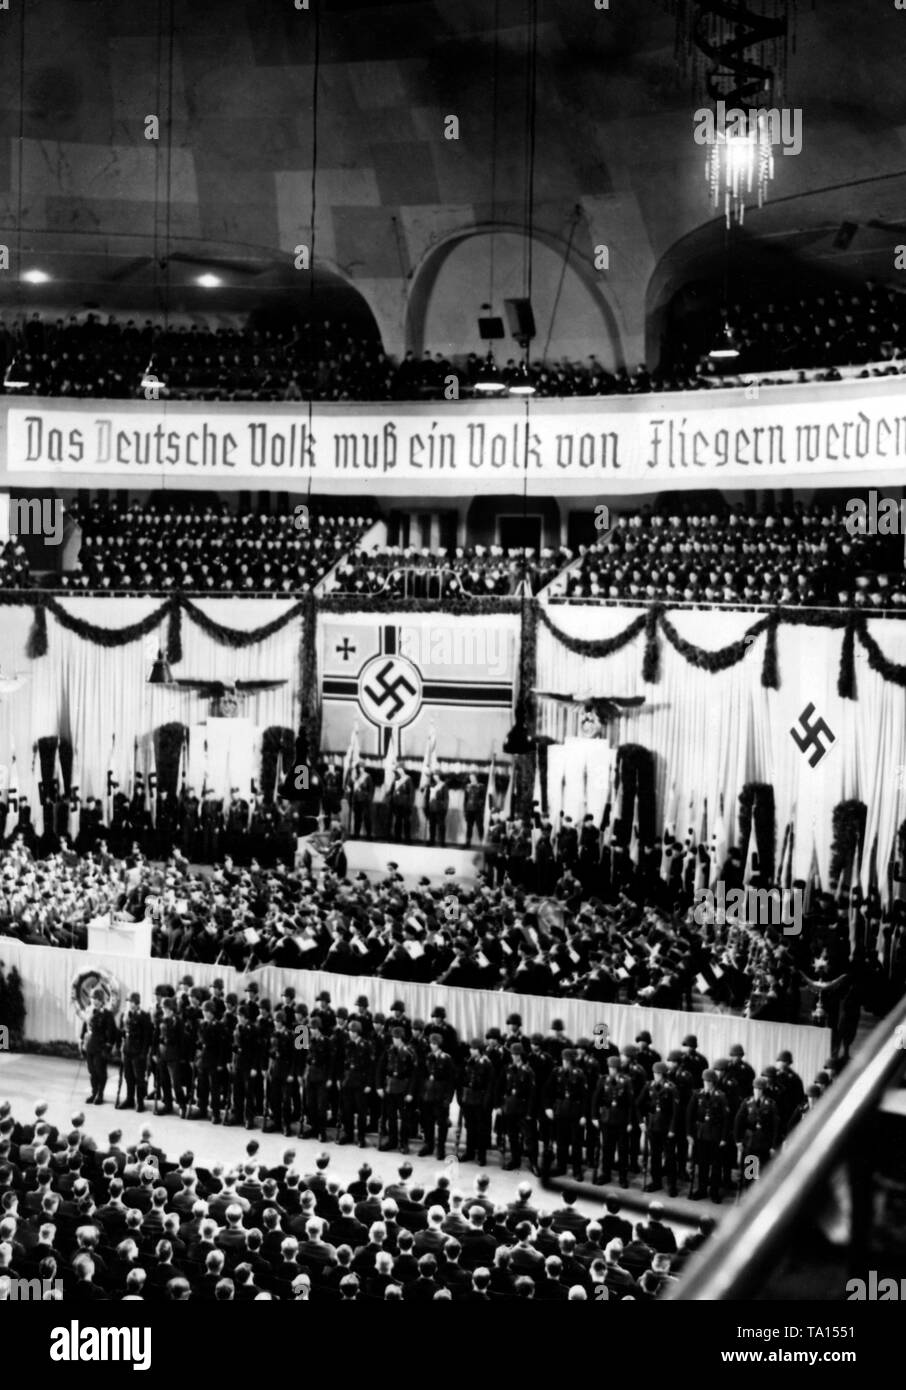 View of the Berlin Sportpalast during the rally of the Luftwaffe Propaganda Week. Reichsmarschall Hermann Goering had ordered this event. In the background, a banner with the inscription 'The German nation must become a nation of airmen'. Stock Photo